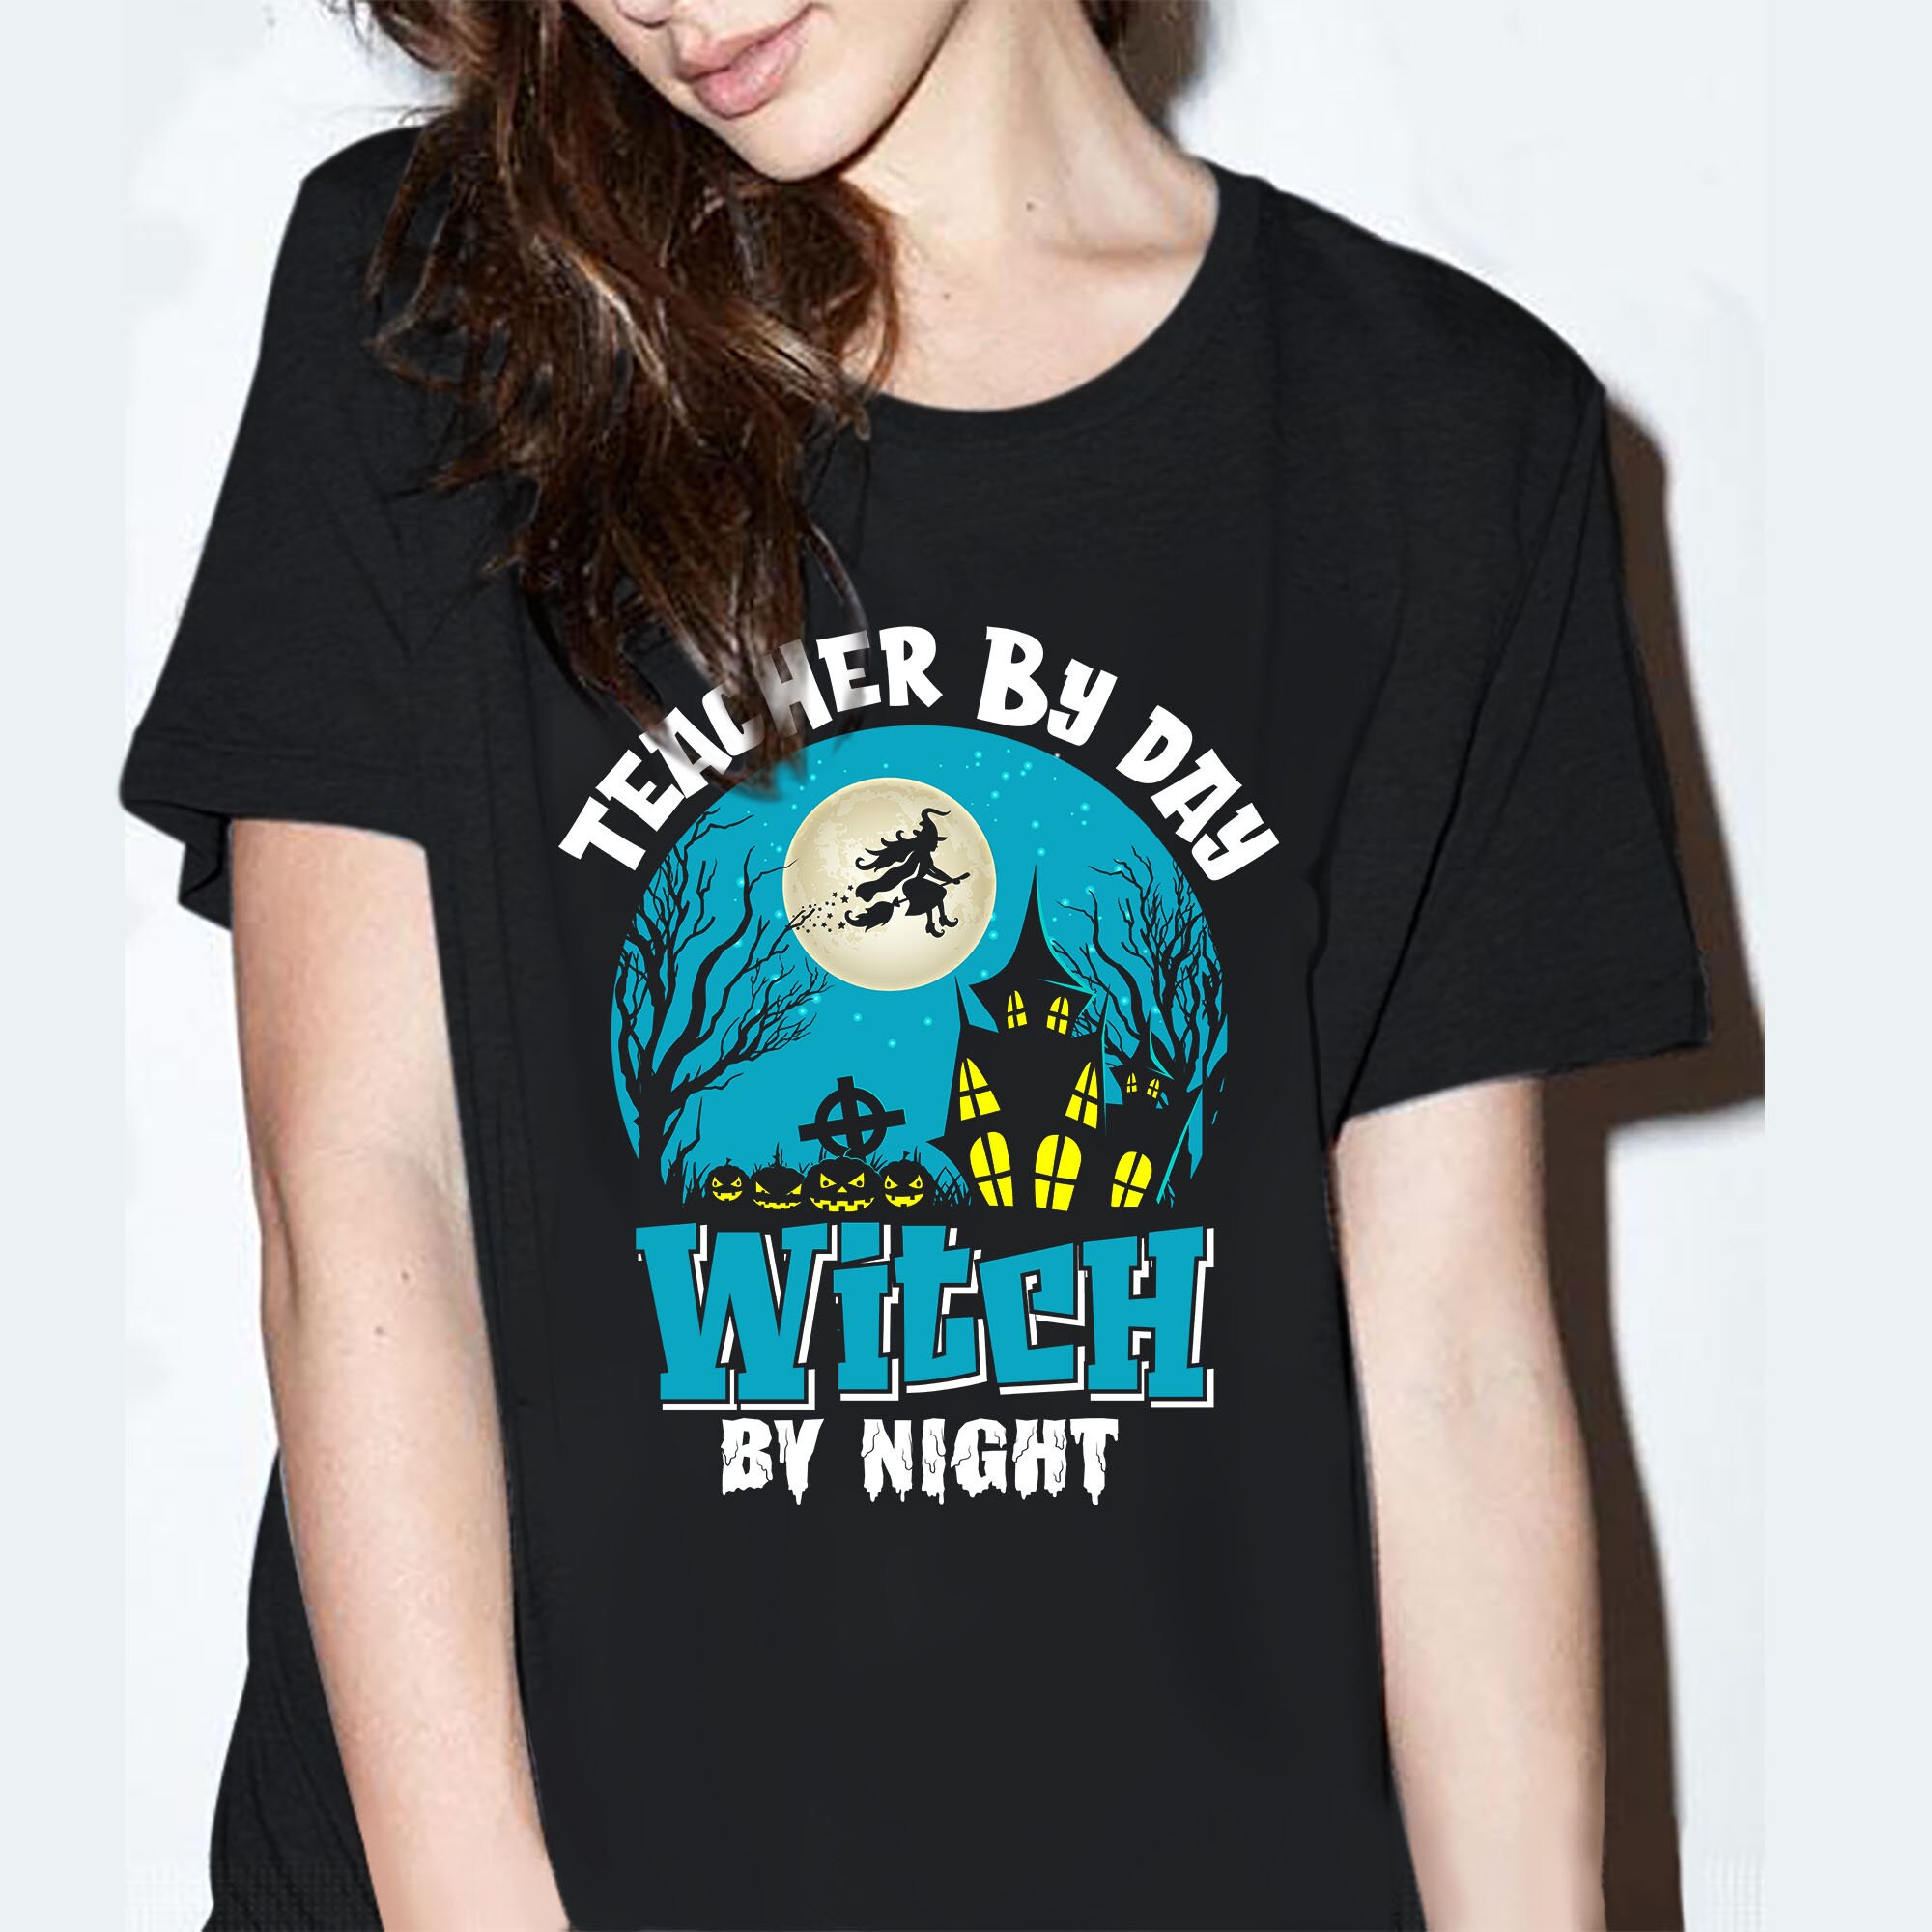 Teacher By Day Which By Night Funny T-Shirt